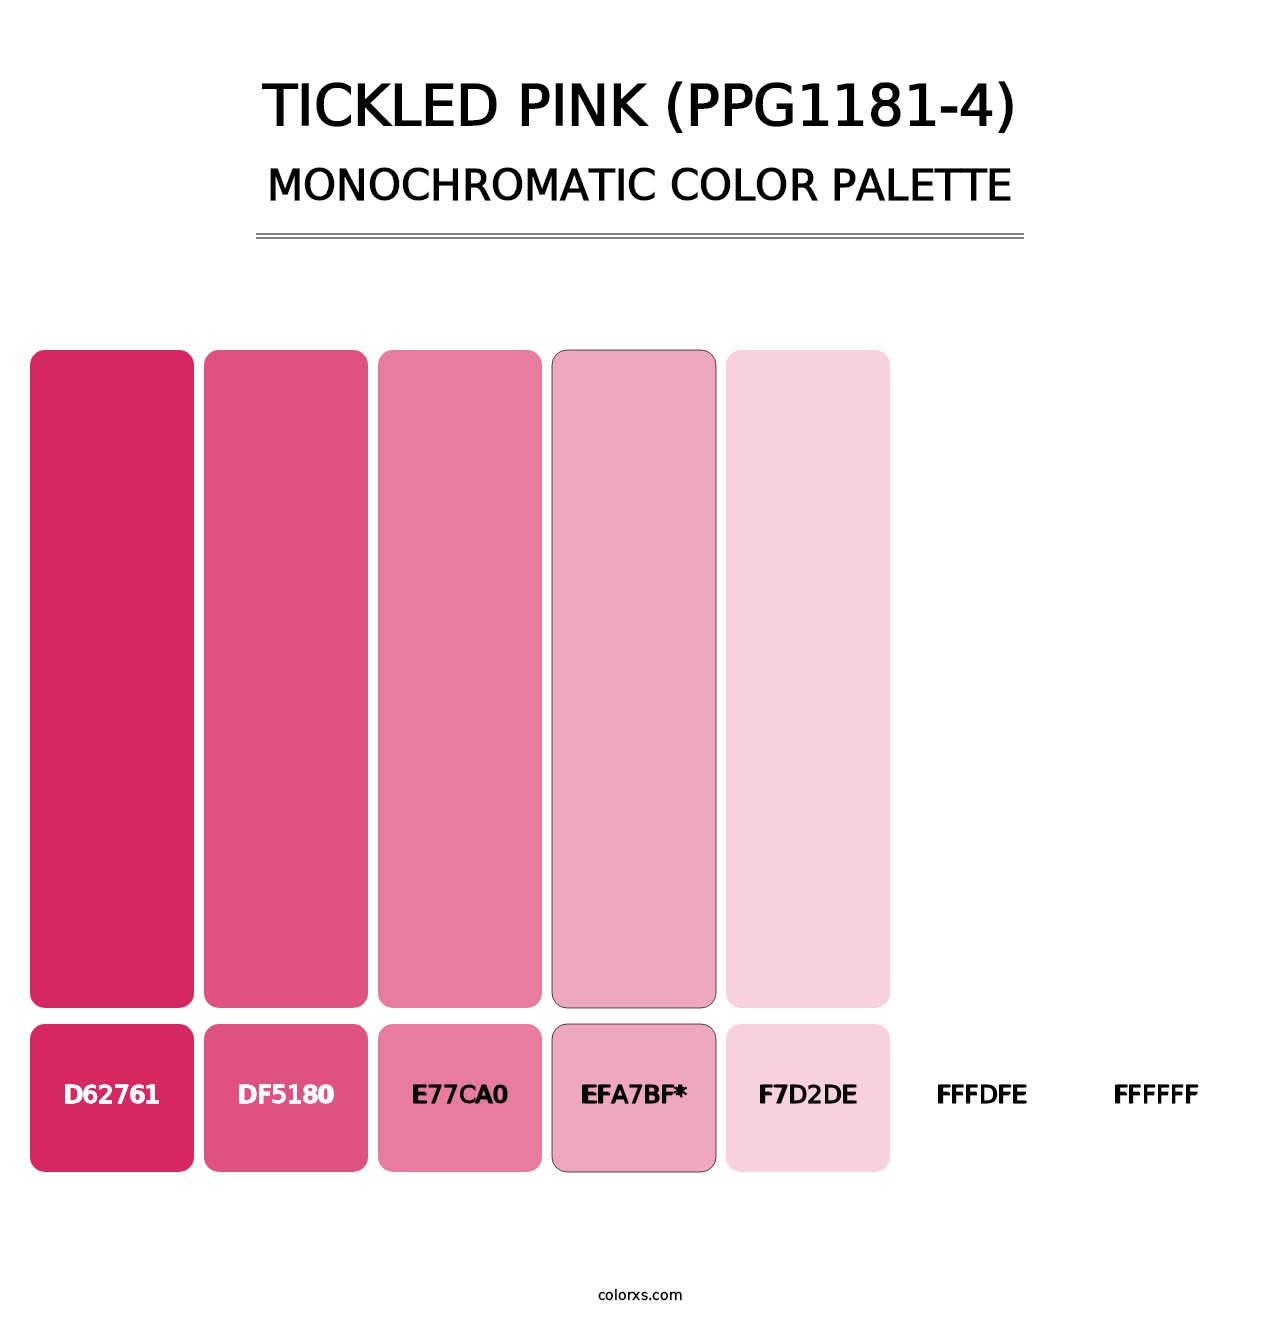 Tickled Pink (PPG1181-4) - Monochromatic Color Palette